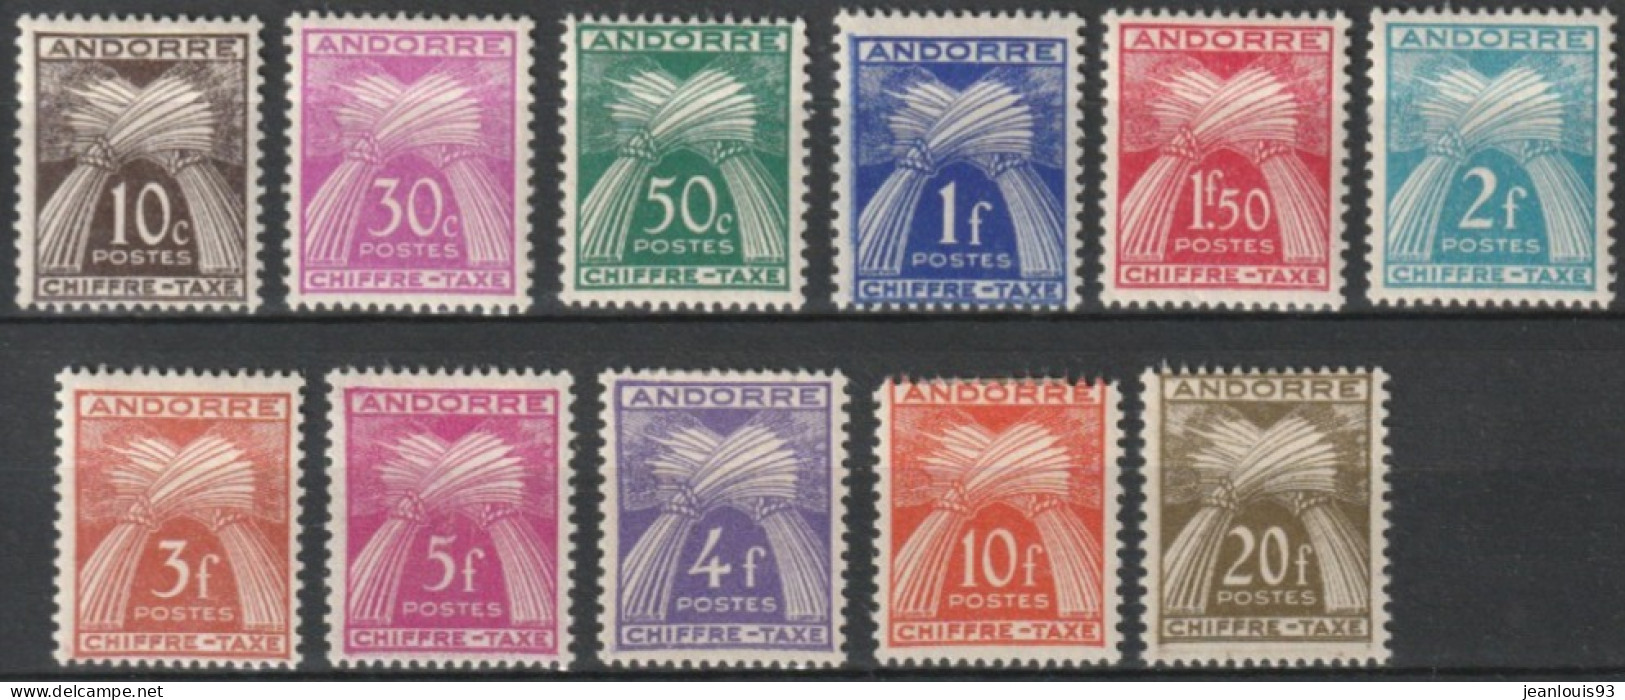 ANDORRE FRANCAIS - TAXE 21/31 COMPLETE NEUF* AVEC CHARNIERE COTE 25 EUR - Unused Stamps